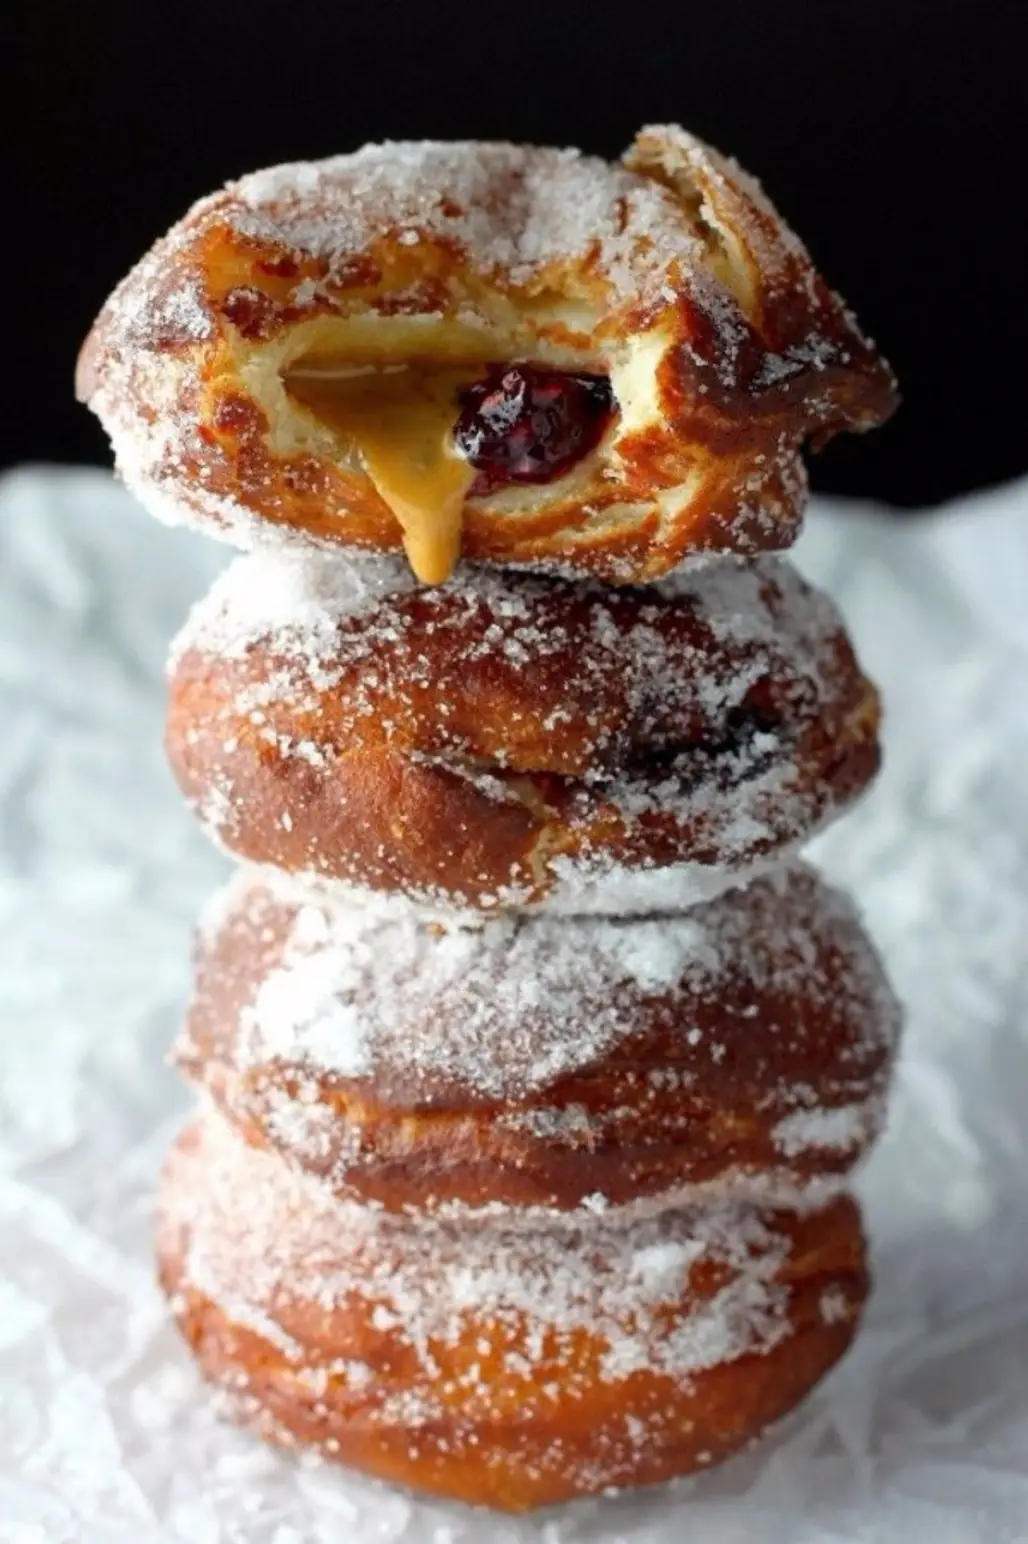 Bakery Style Peanut Butter and Jelly Donuts